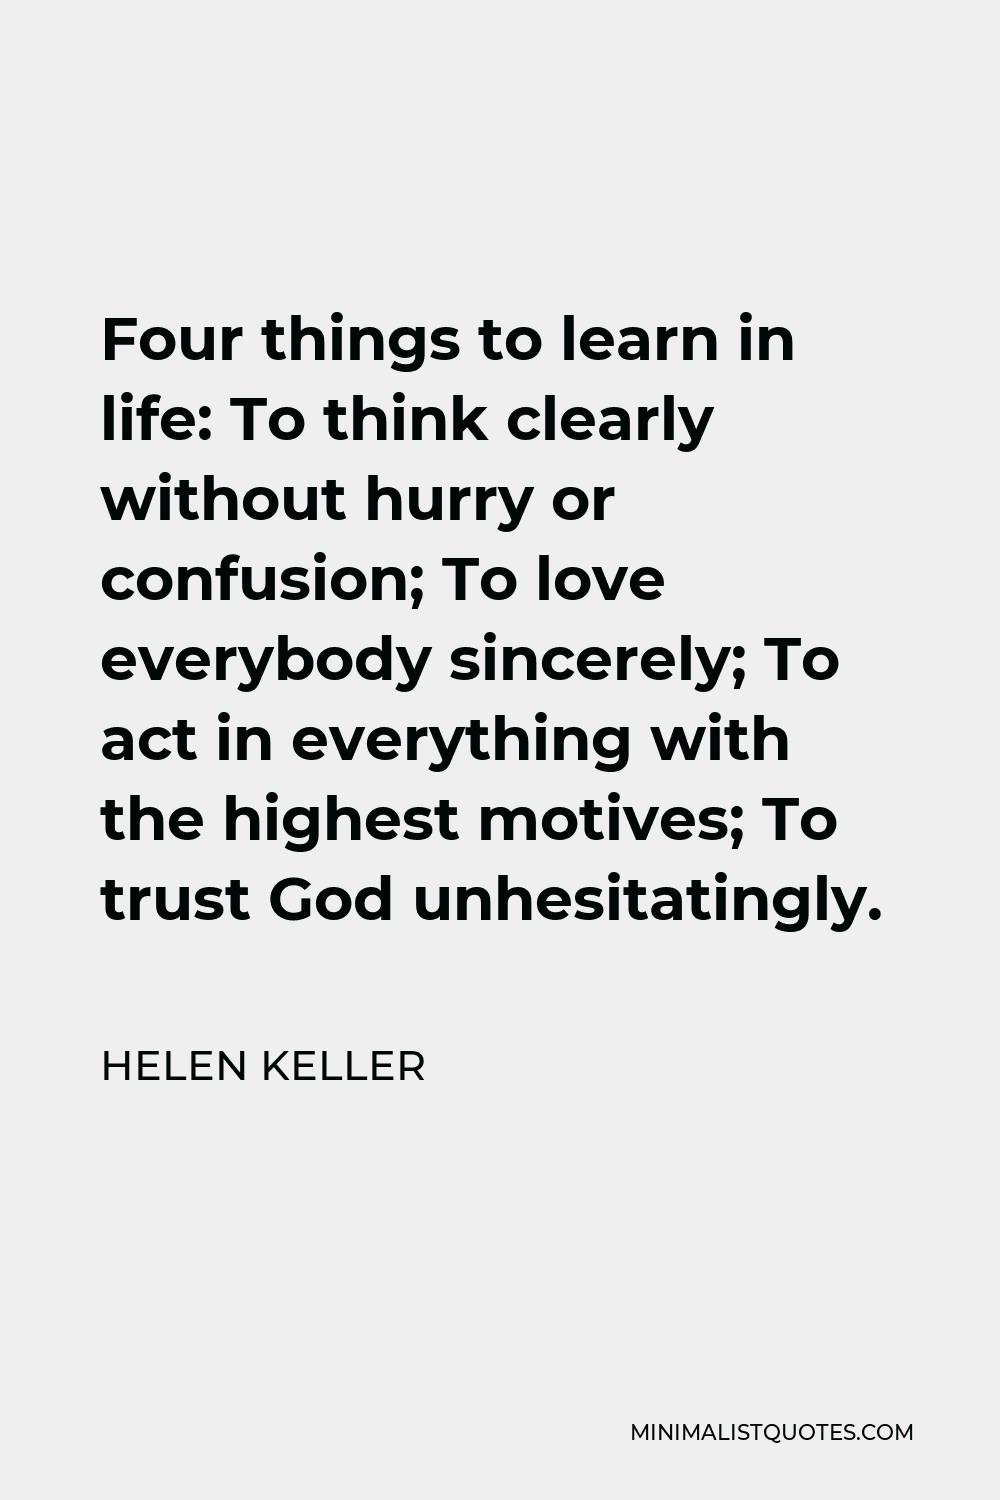 Helen Keller Quote - Four things to learn in life: To think clearly without hurry or confusion; To love everybody sincerely; To act in everything with the highest motives; To trust God unhesitatingly.